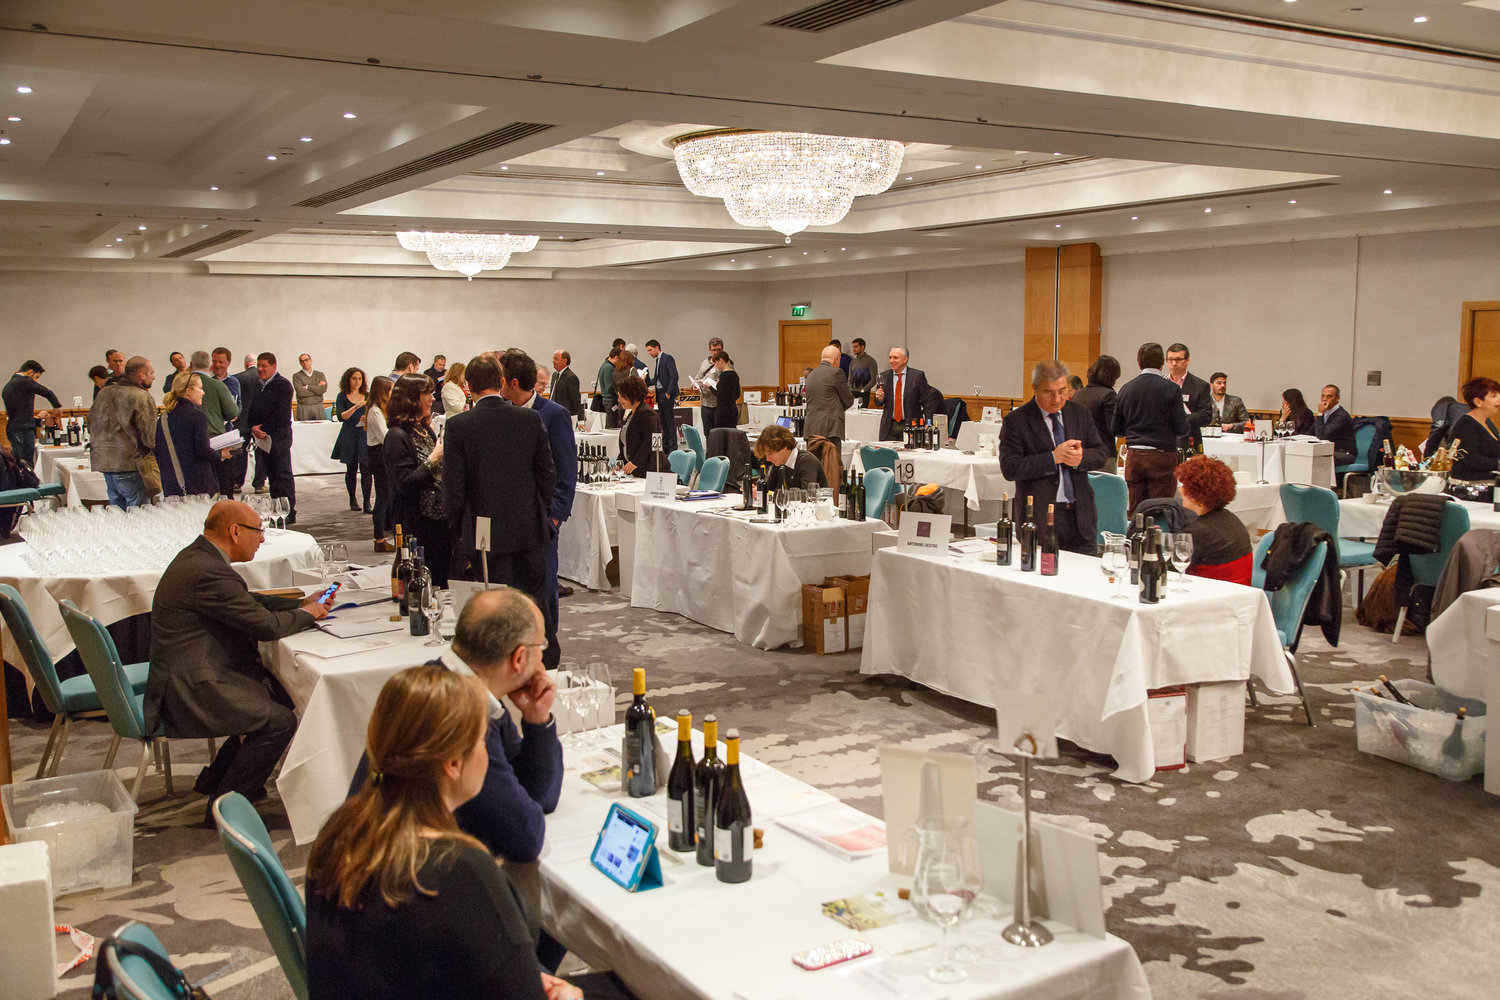 After two years the Italian Trade Agency London is to host Borsa Vini Italiani again as an in-person event in Dublin shortly. 